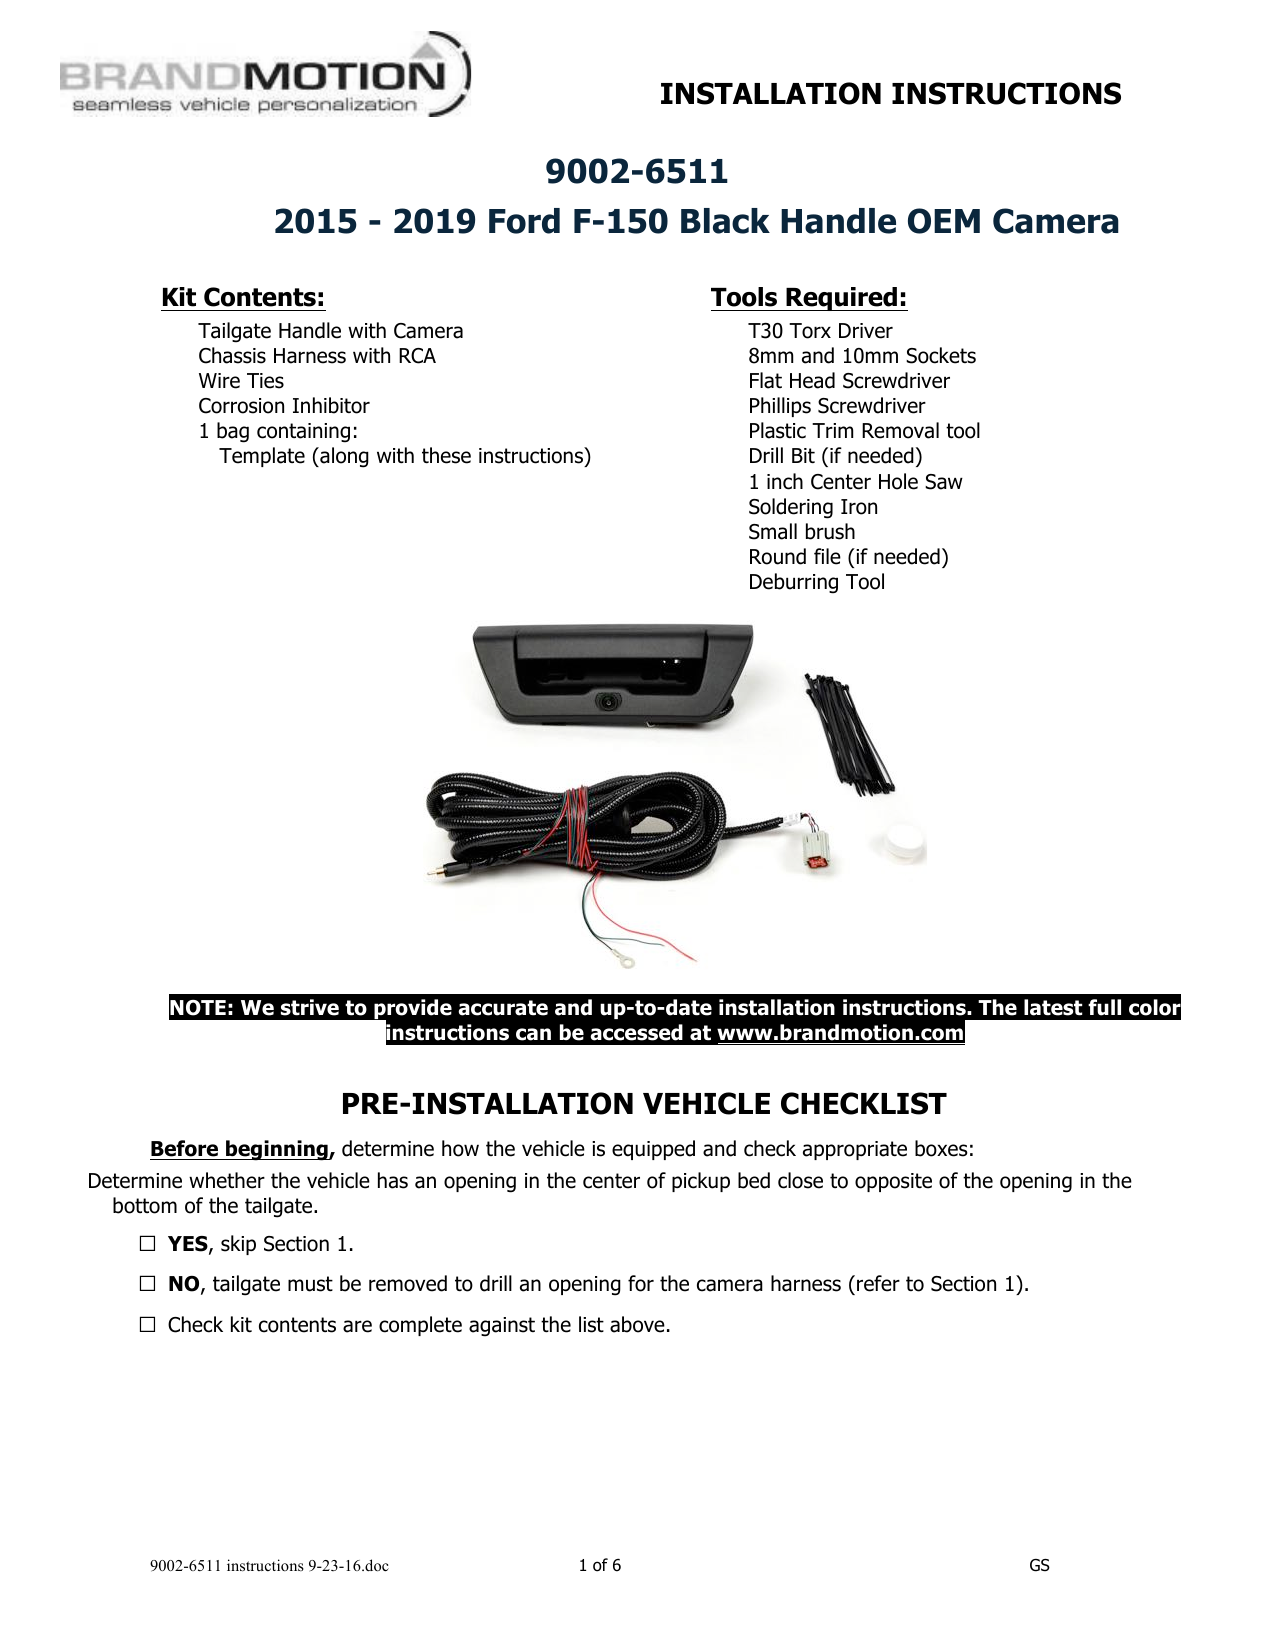 Brandmotion 9002-6511 Tailgate Handle Backup Camera for 2015 or Newer Ford F-150